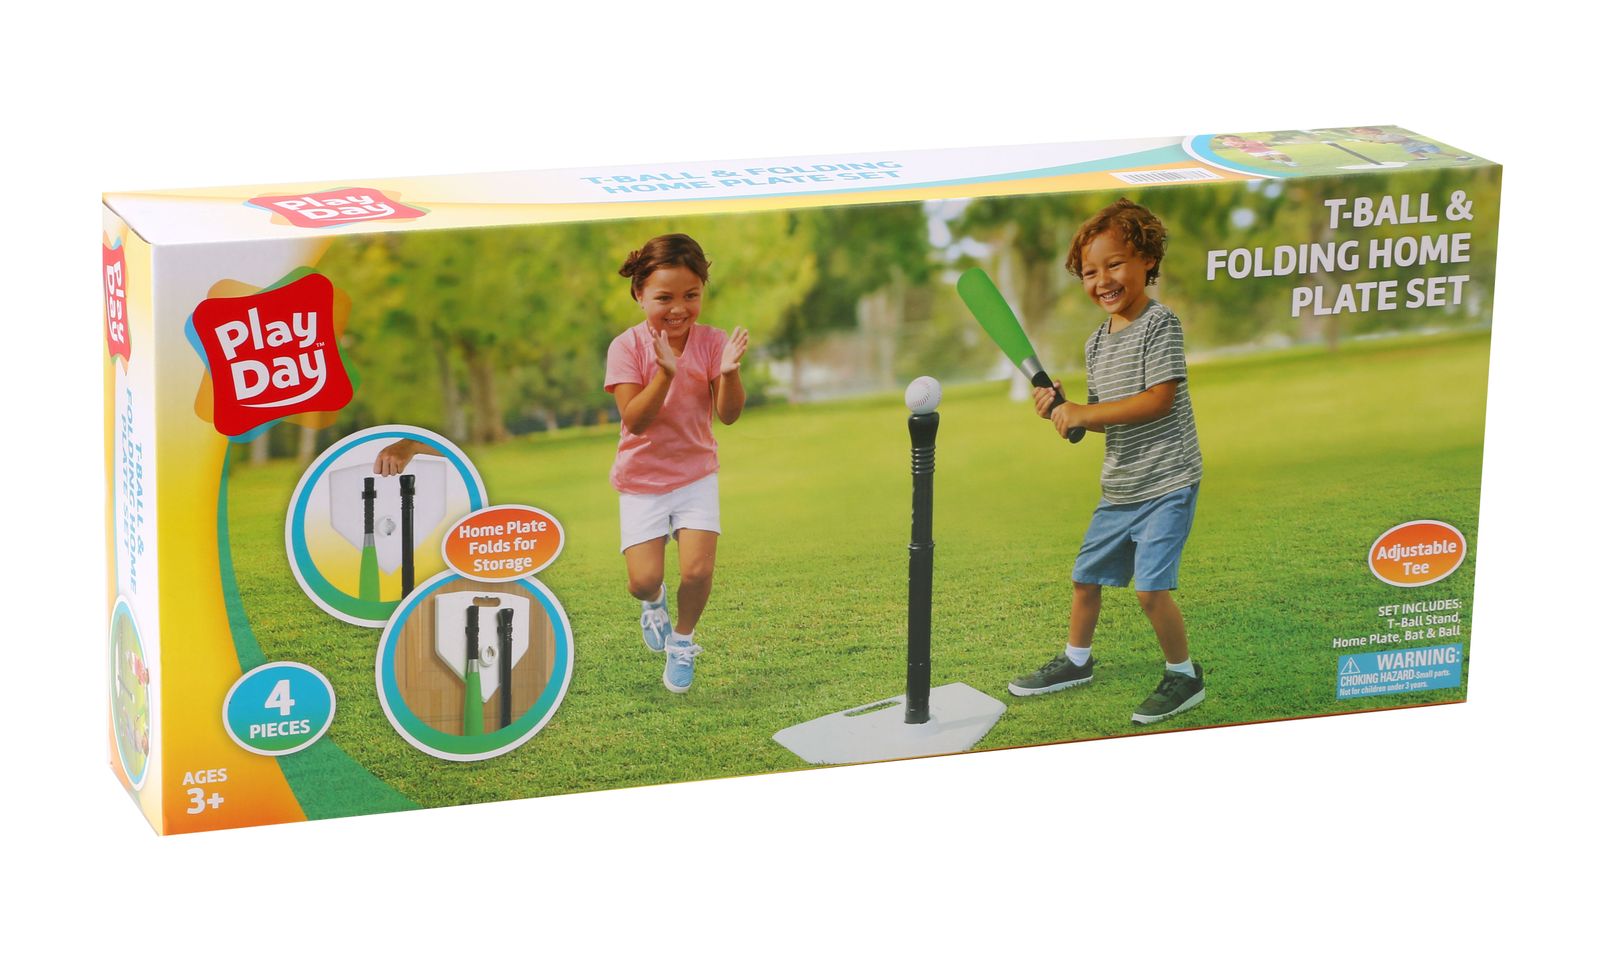 T-Ball and Folding Home Plate Set by Play Day 